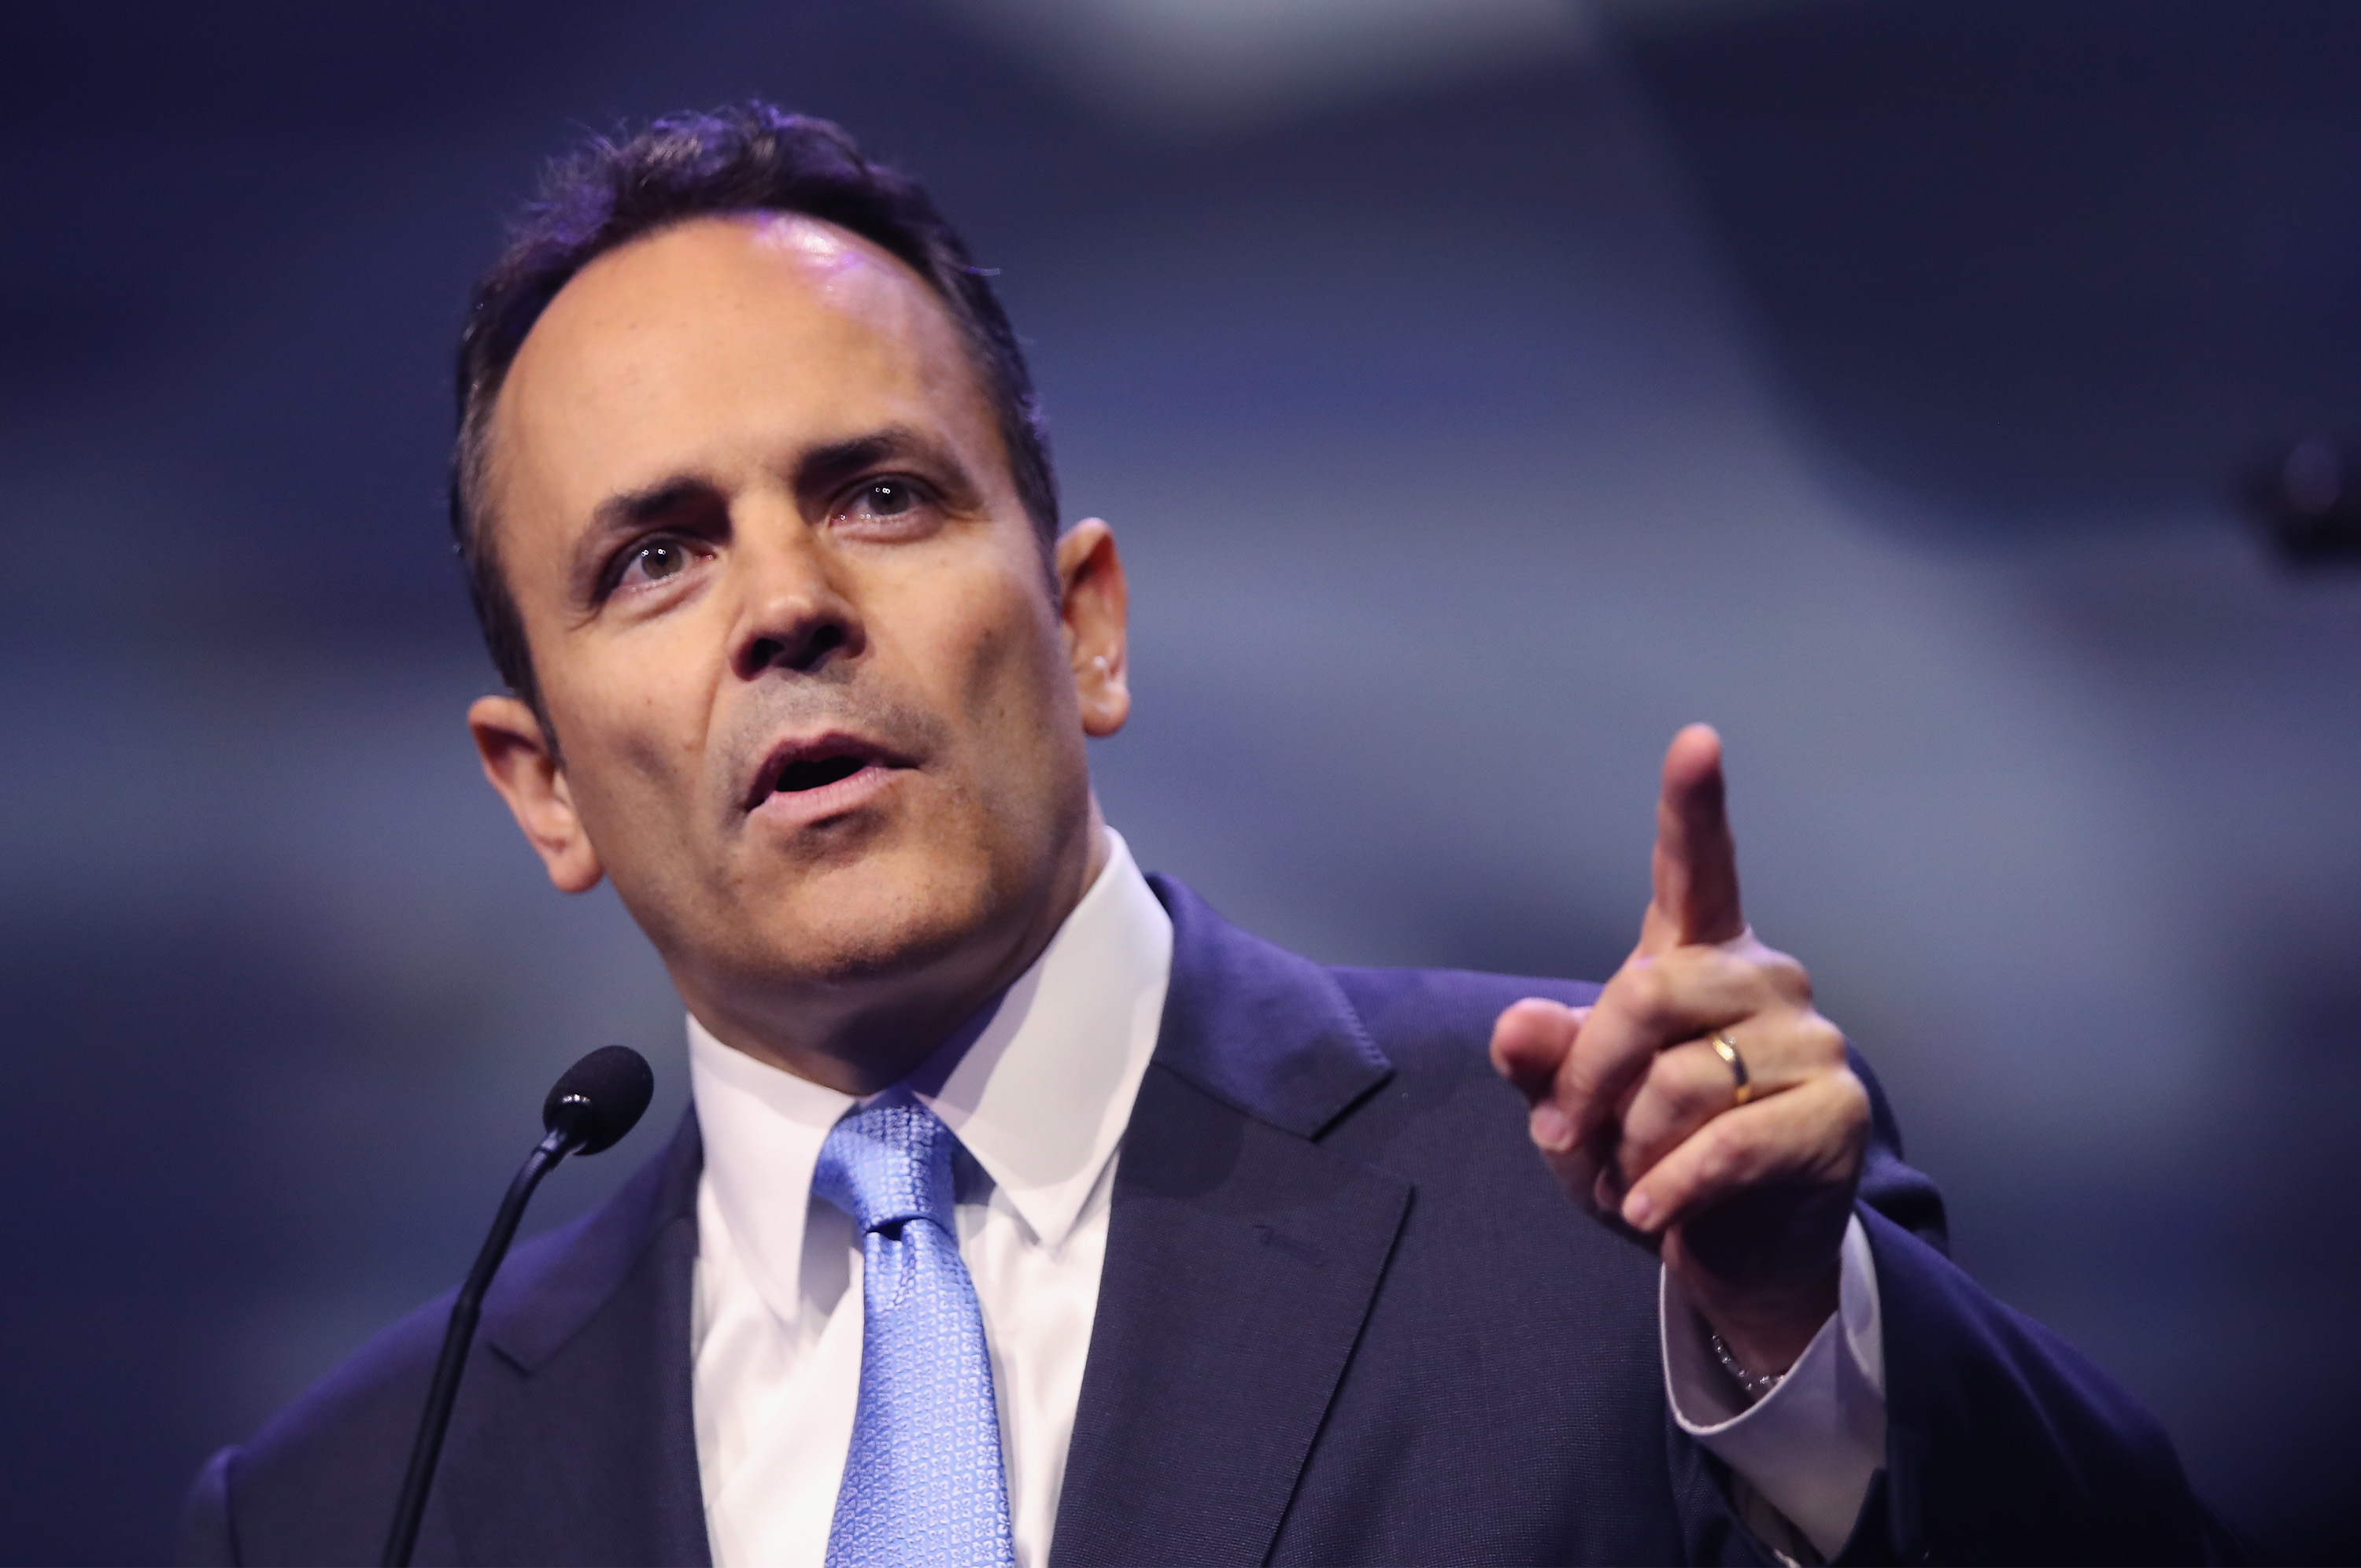 LOUISVILLE, KY - MAY 20: Gov. Matt Bevin (R-Ky.) speaks at the National Rifle Association's NRA-ILA Leadership Forum during the NRA Convention at the Kentucky Exposition Center on May 20, 2016 in Louisville, Kentucky. The convention, which opened today, runs until May 22. (Photo by Scott Olson/Getty Images)